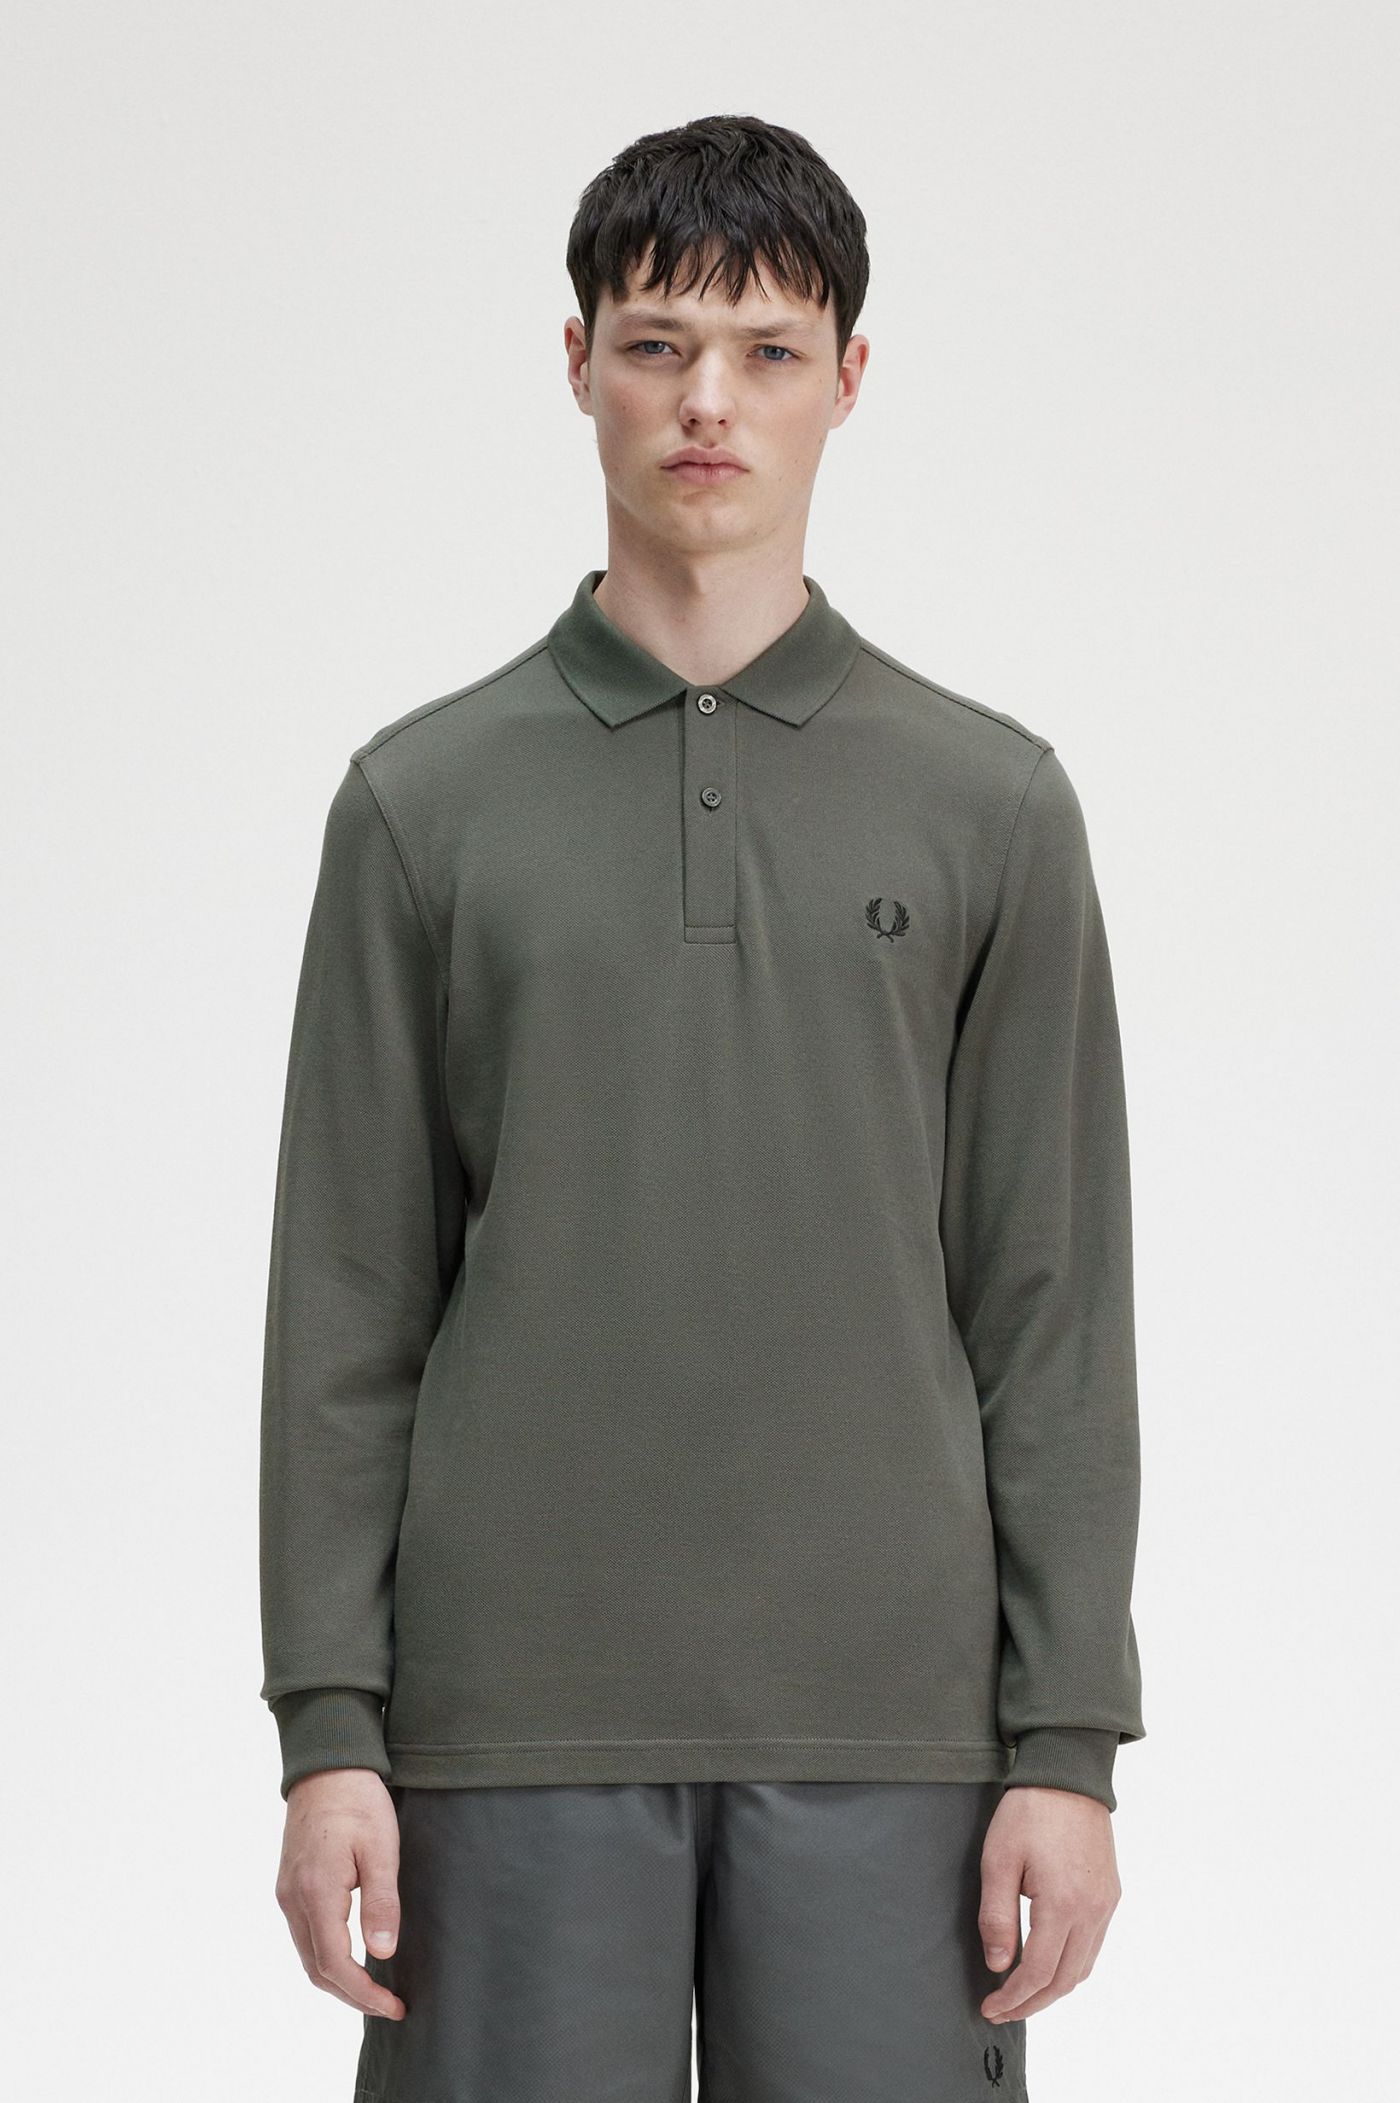 M6006 - Field Green | The Fred Perry Shirt | Men's Short & Long Sleeve ...